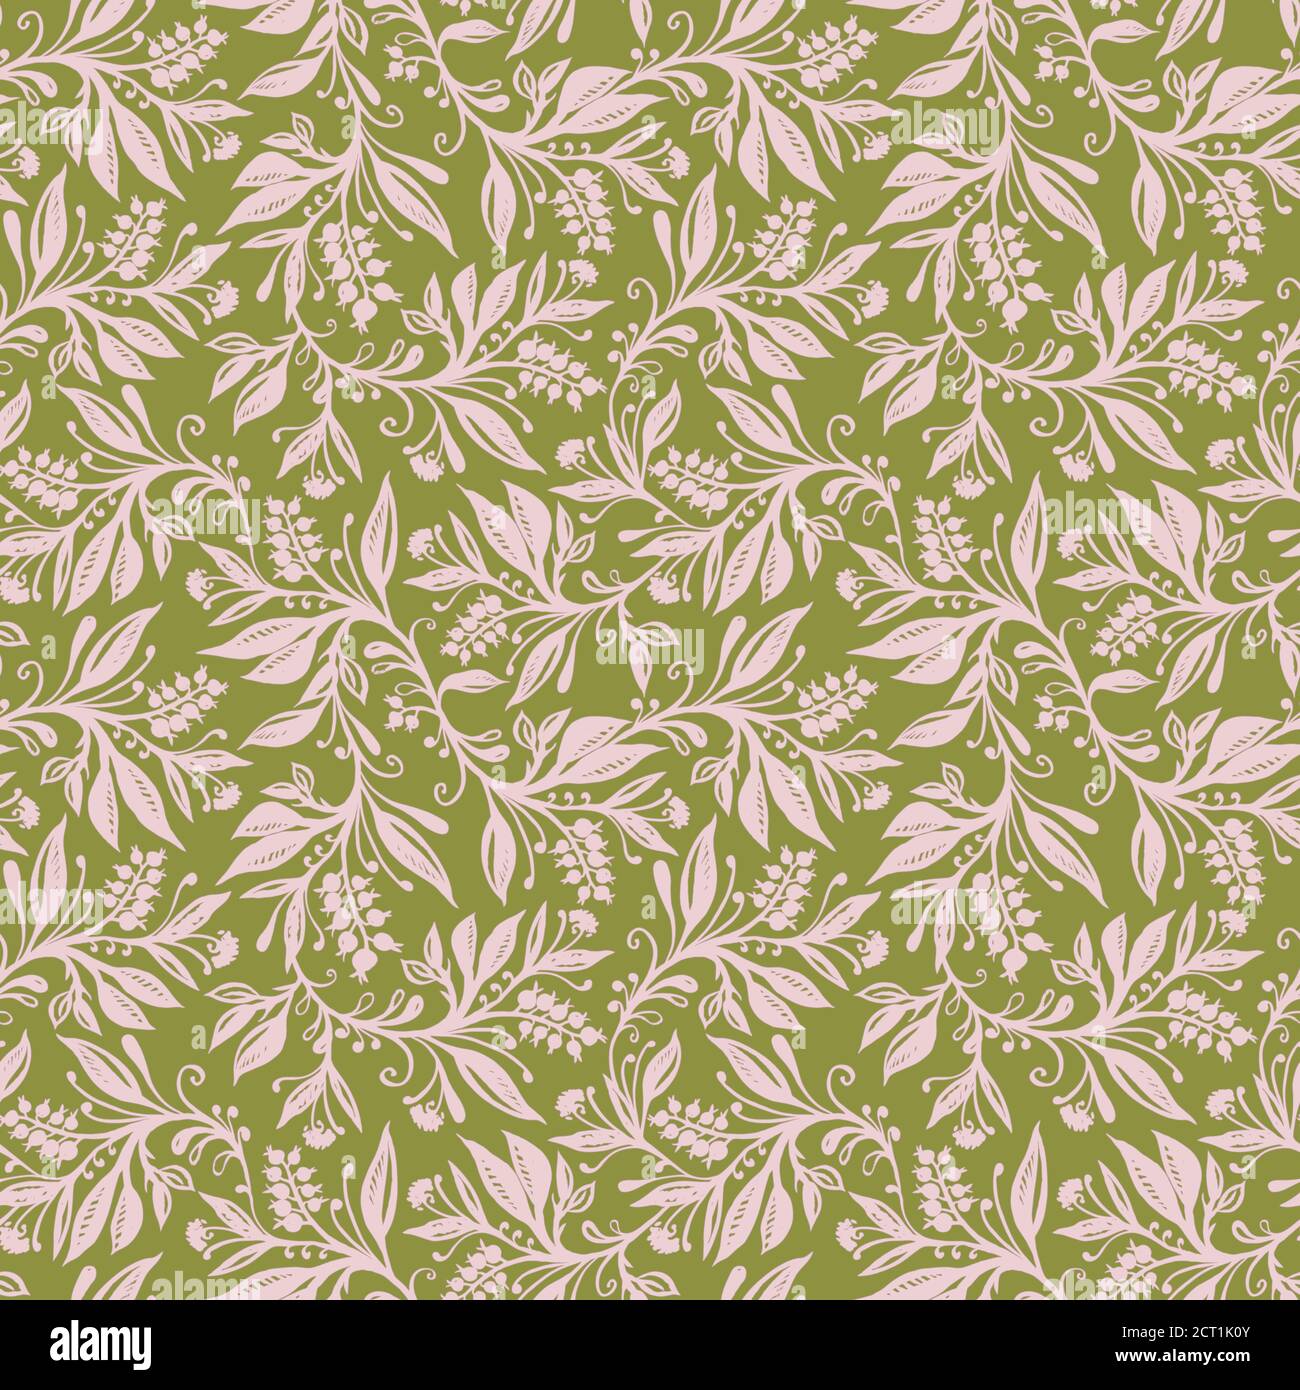 Floral seamless pattern with leaves and berries in chartreuse green ...